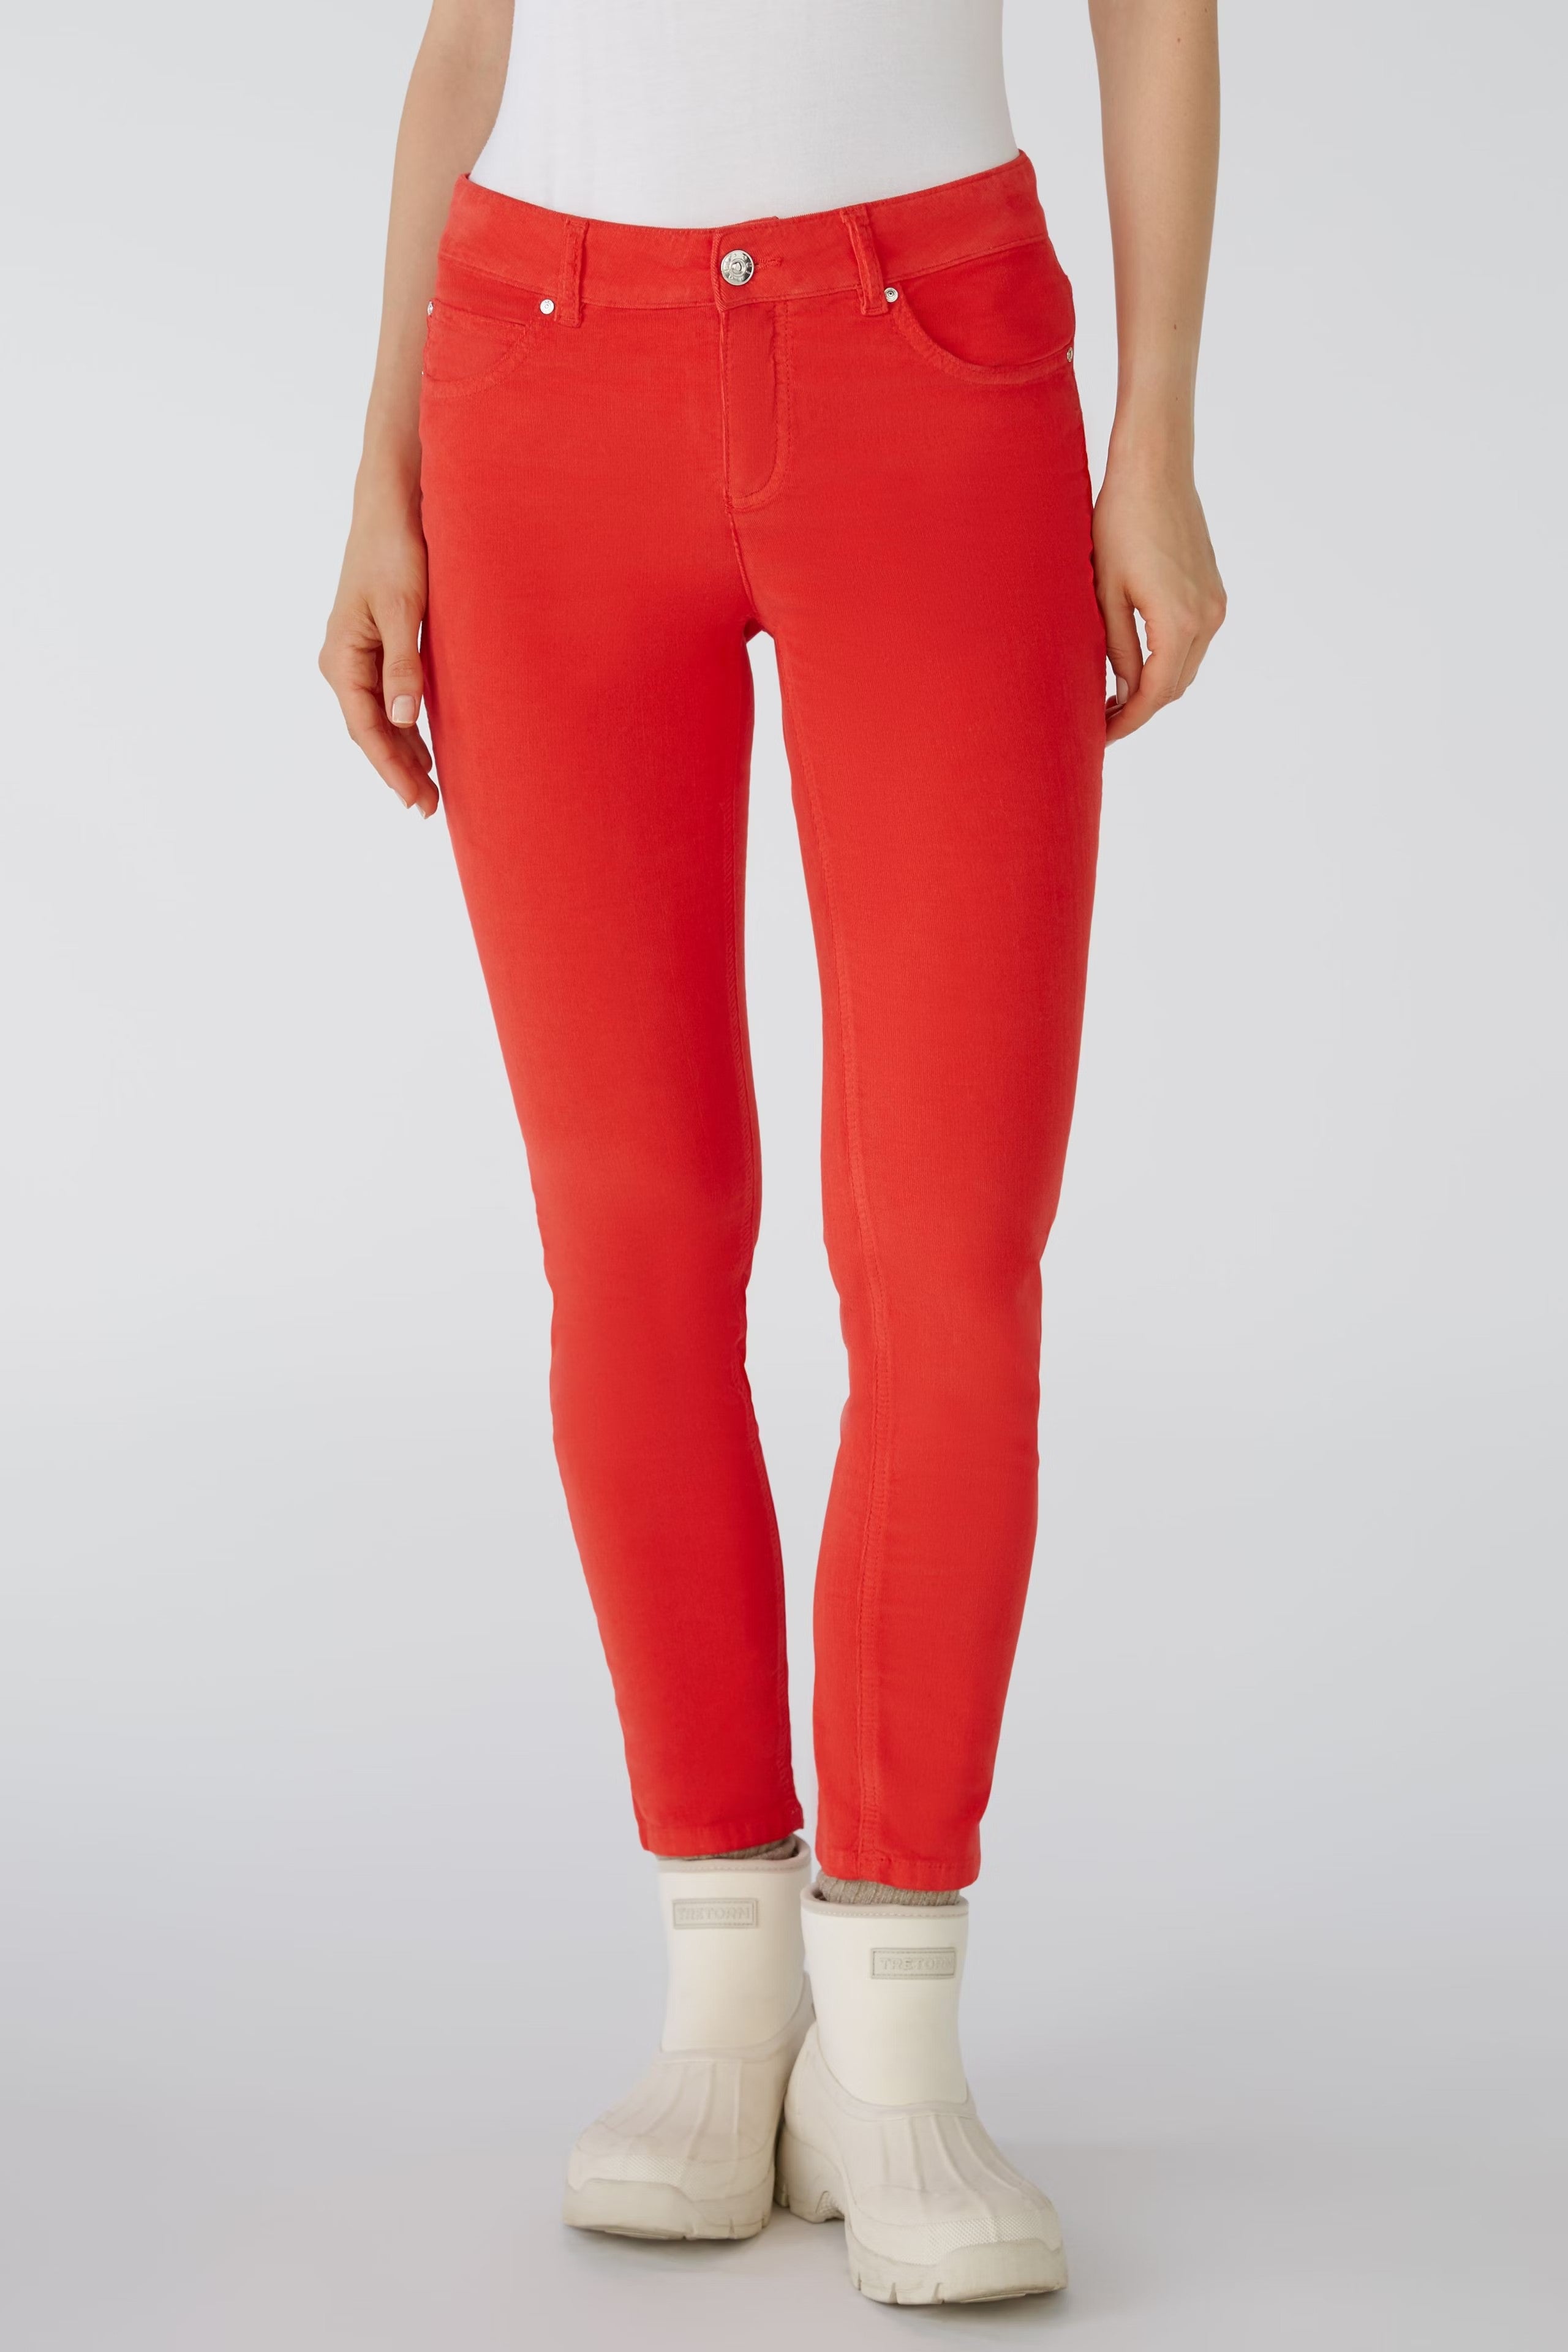 Baxtor Cord Jeggings in Chinese Red